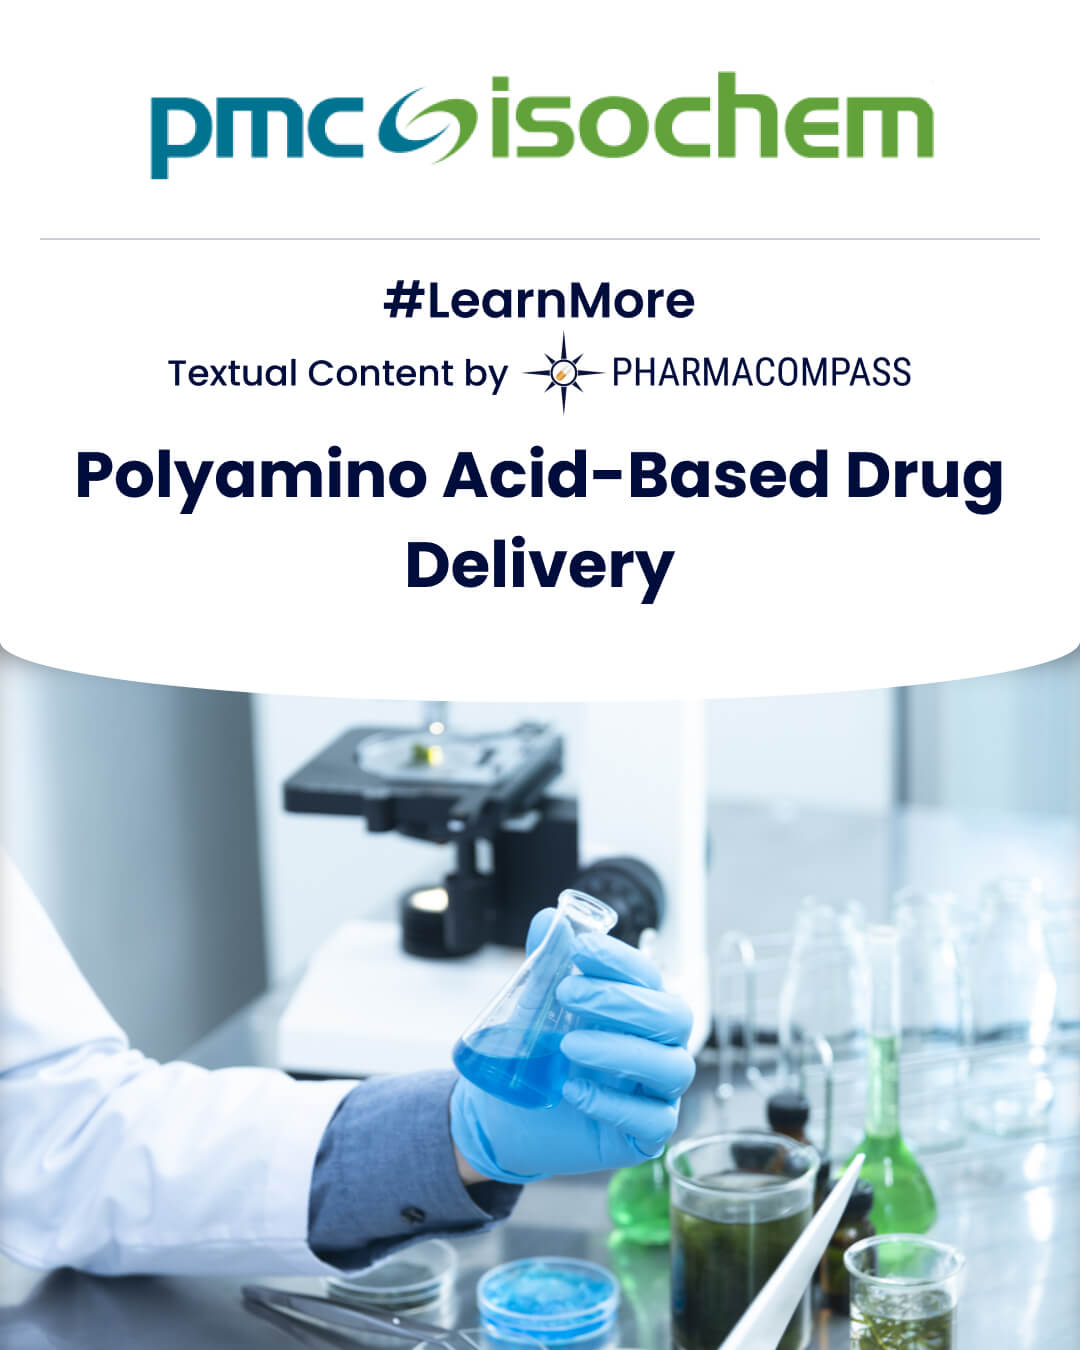 Overview of PMC Isochem`s polyamino acid (PAA) based polymers, polymer conjugates, polypeptides, polyamides for drug delivery on PharmaCompass.